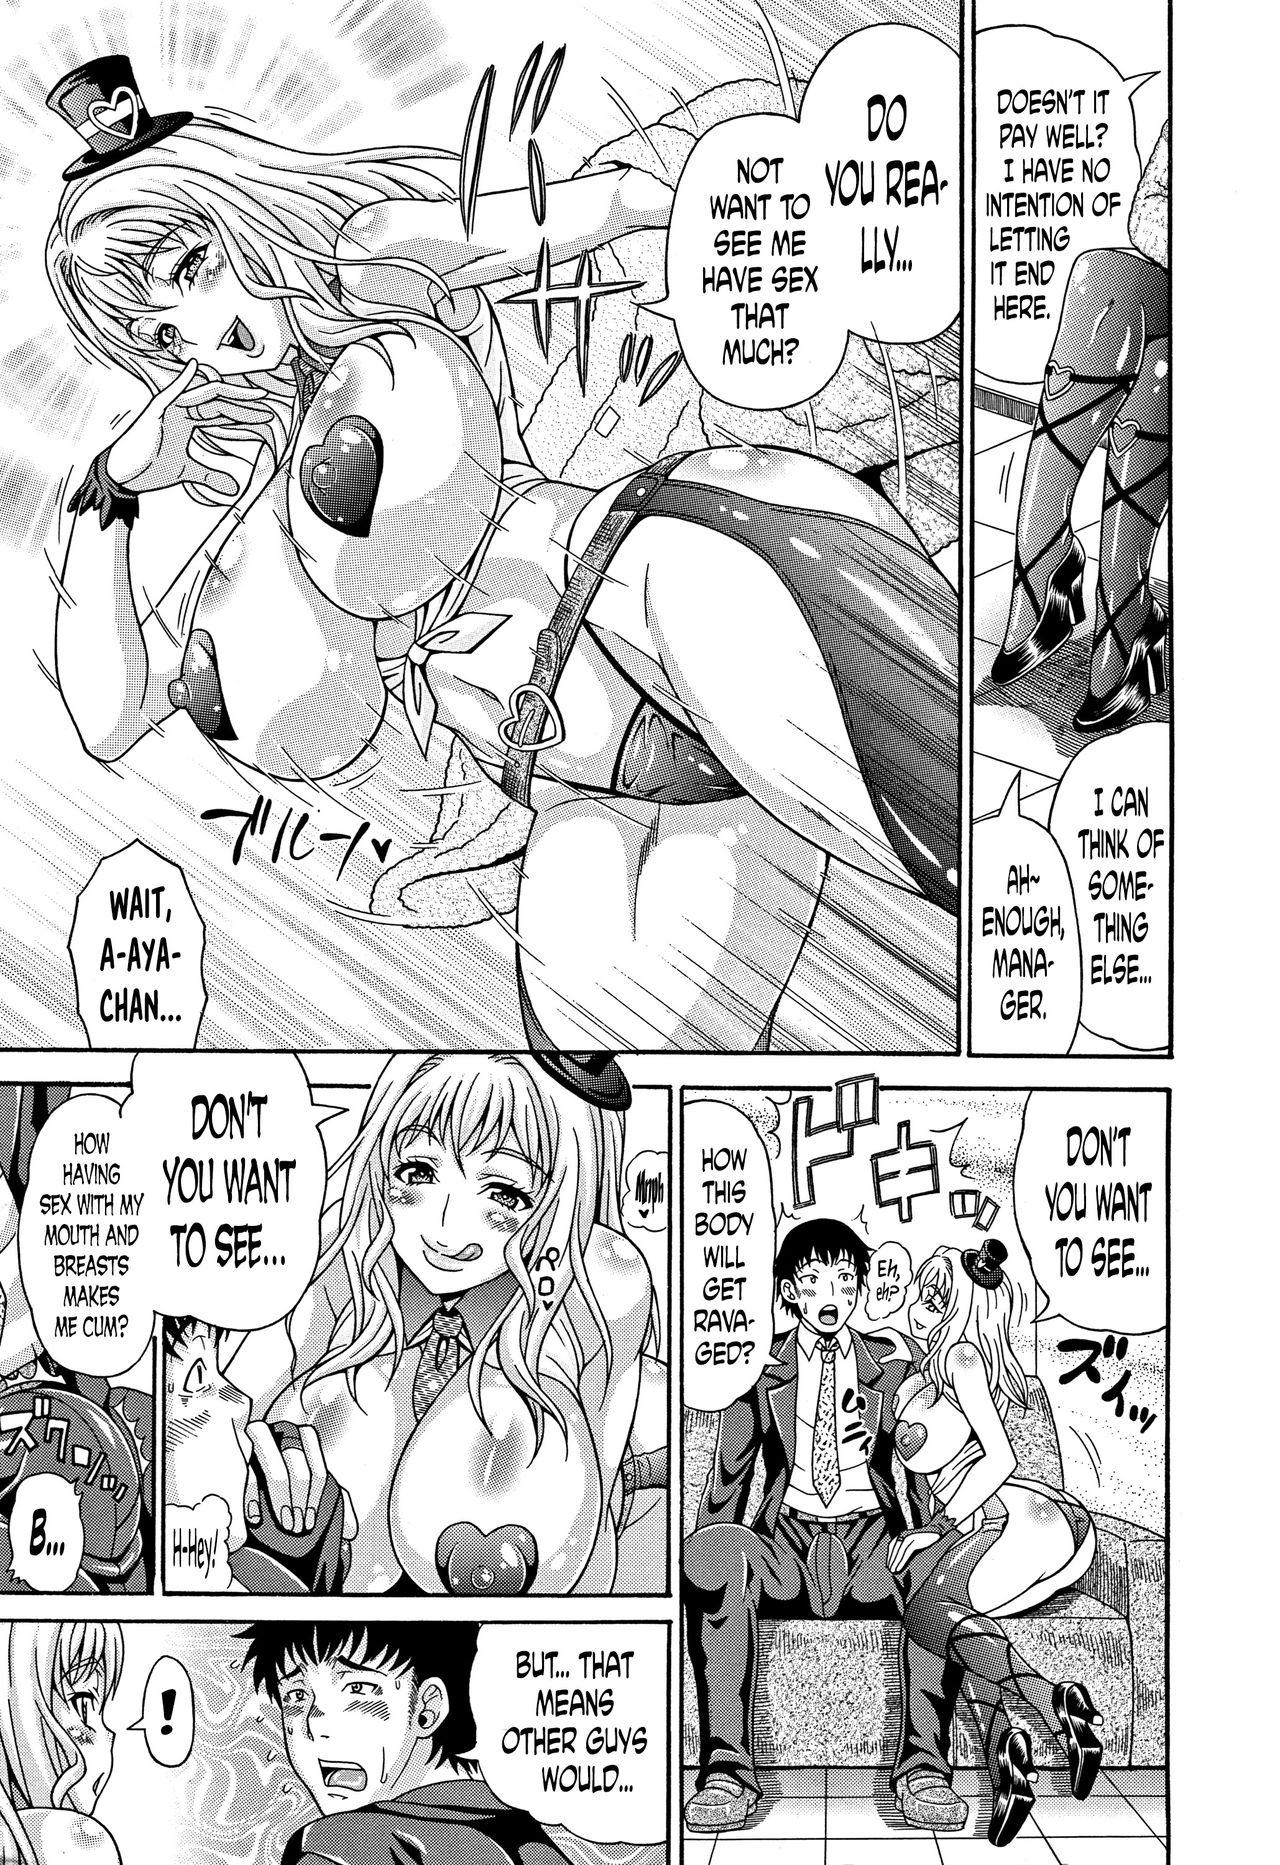 Argentina [Andou Hiroyuki] Mamire Chichi - Sticky Tits Feel Hot All Over. Ch.1-3 [English] [doujin-moe.us] Dicksucking - Page 8